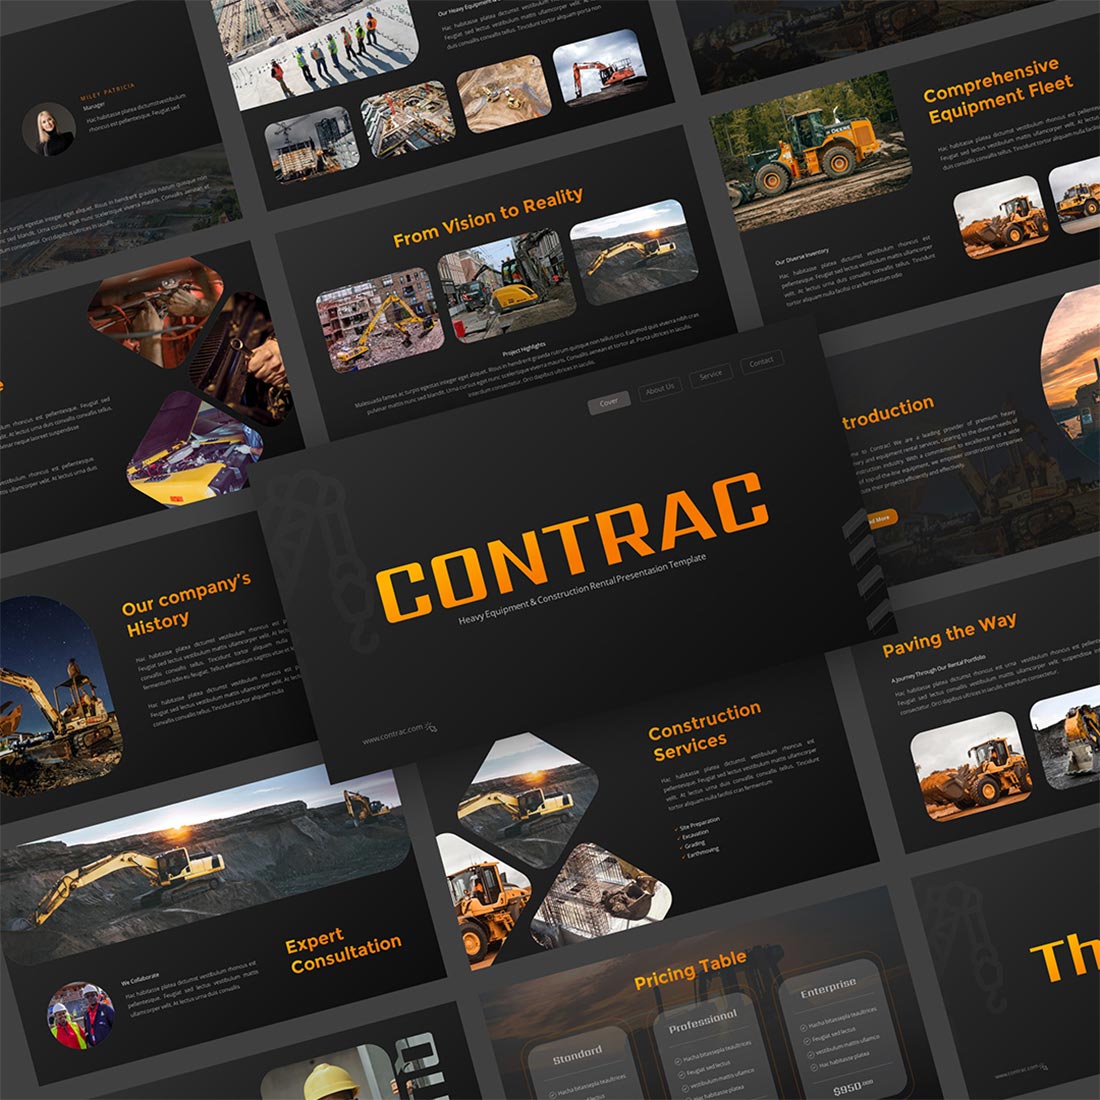 Contrac - Heavy Equipment & Construction Rental Google Slides Template cover image.